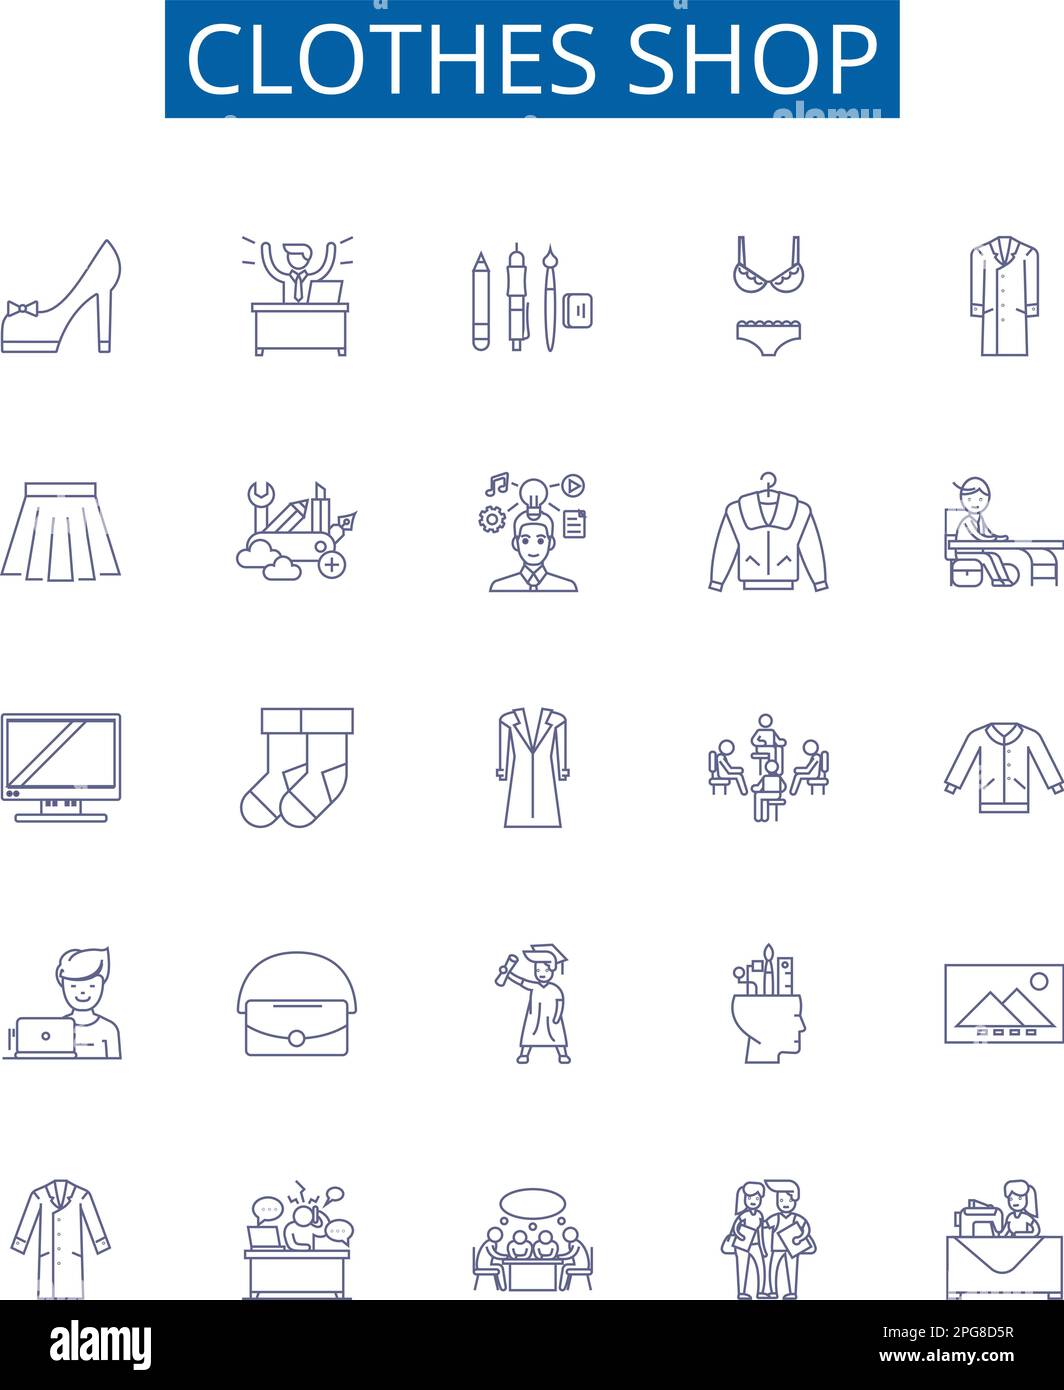 Clothes Shop Line Icons Signs Set Design Collection Of Clothing Shop